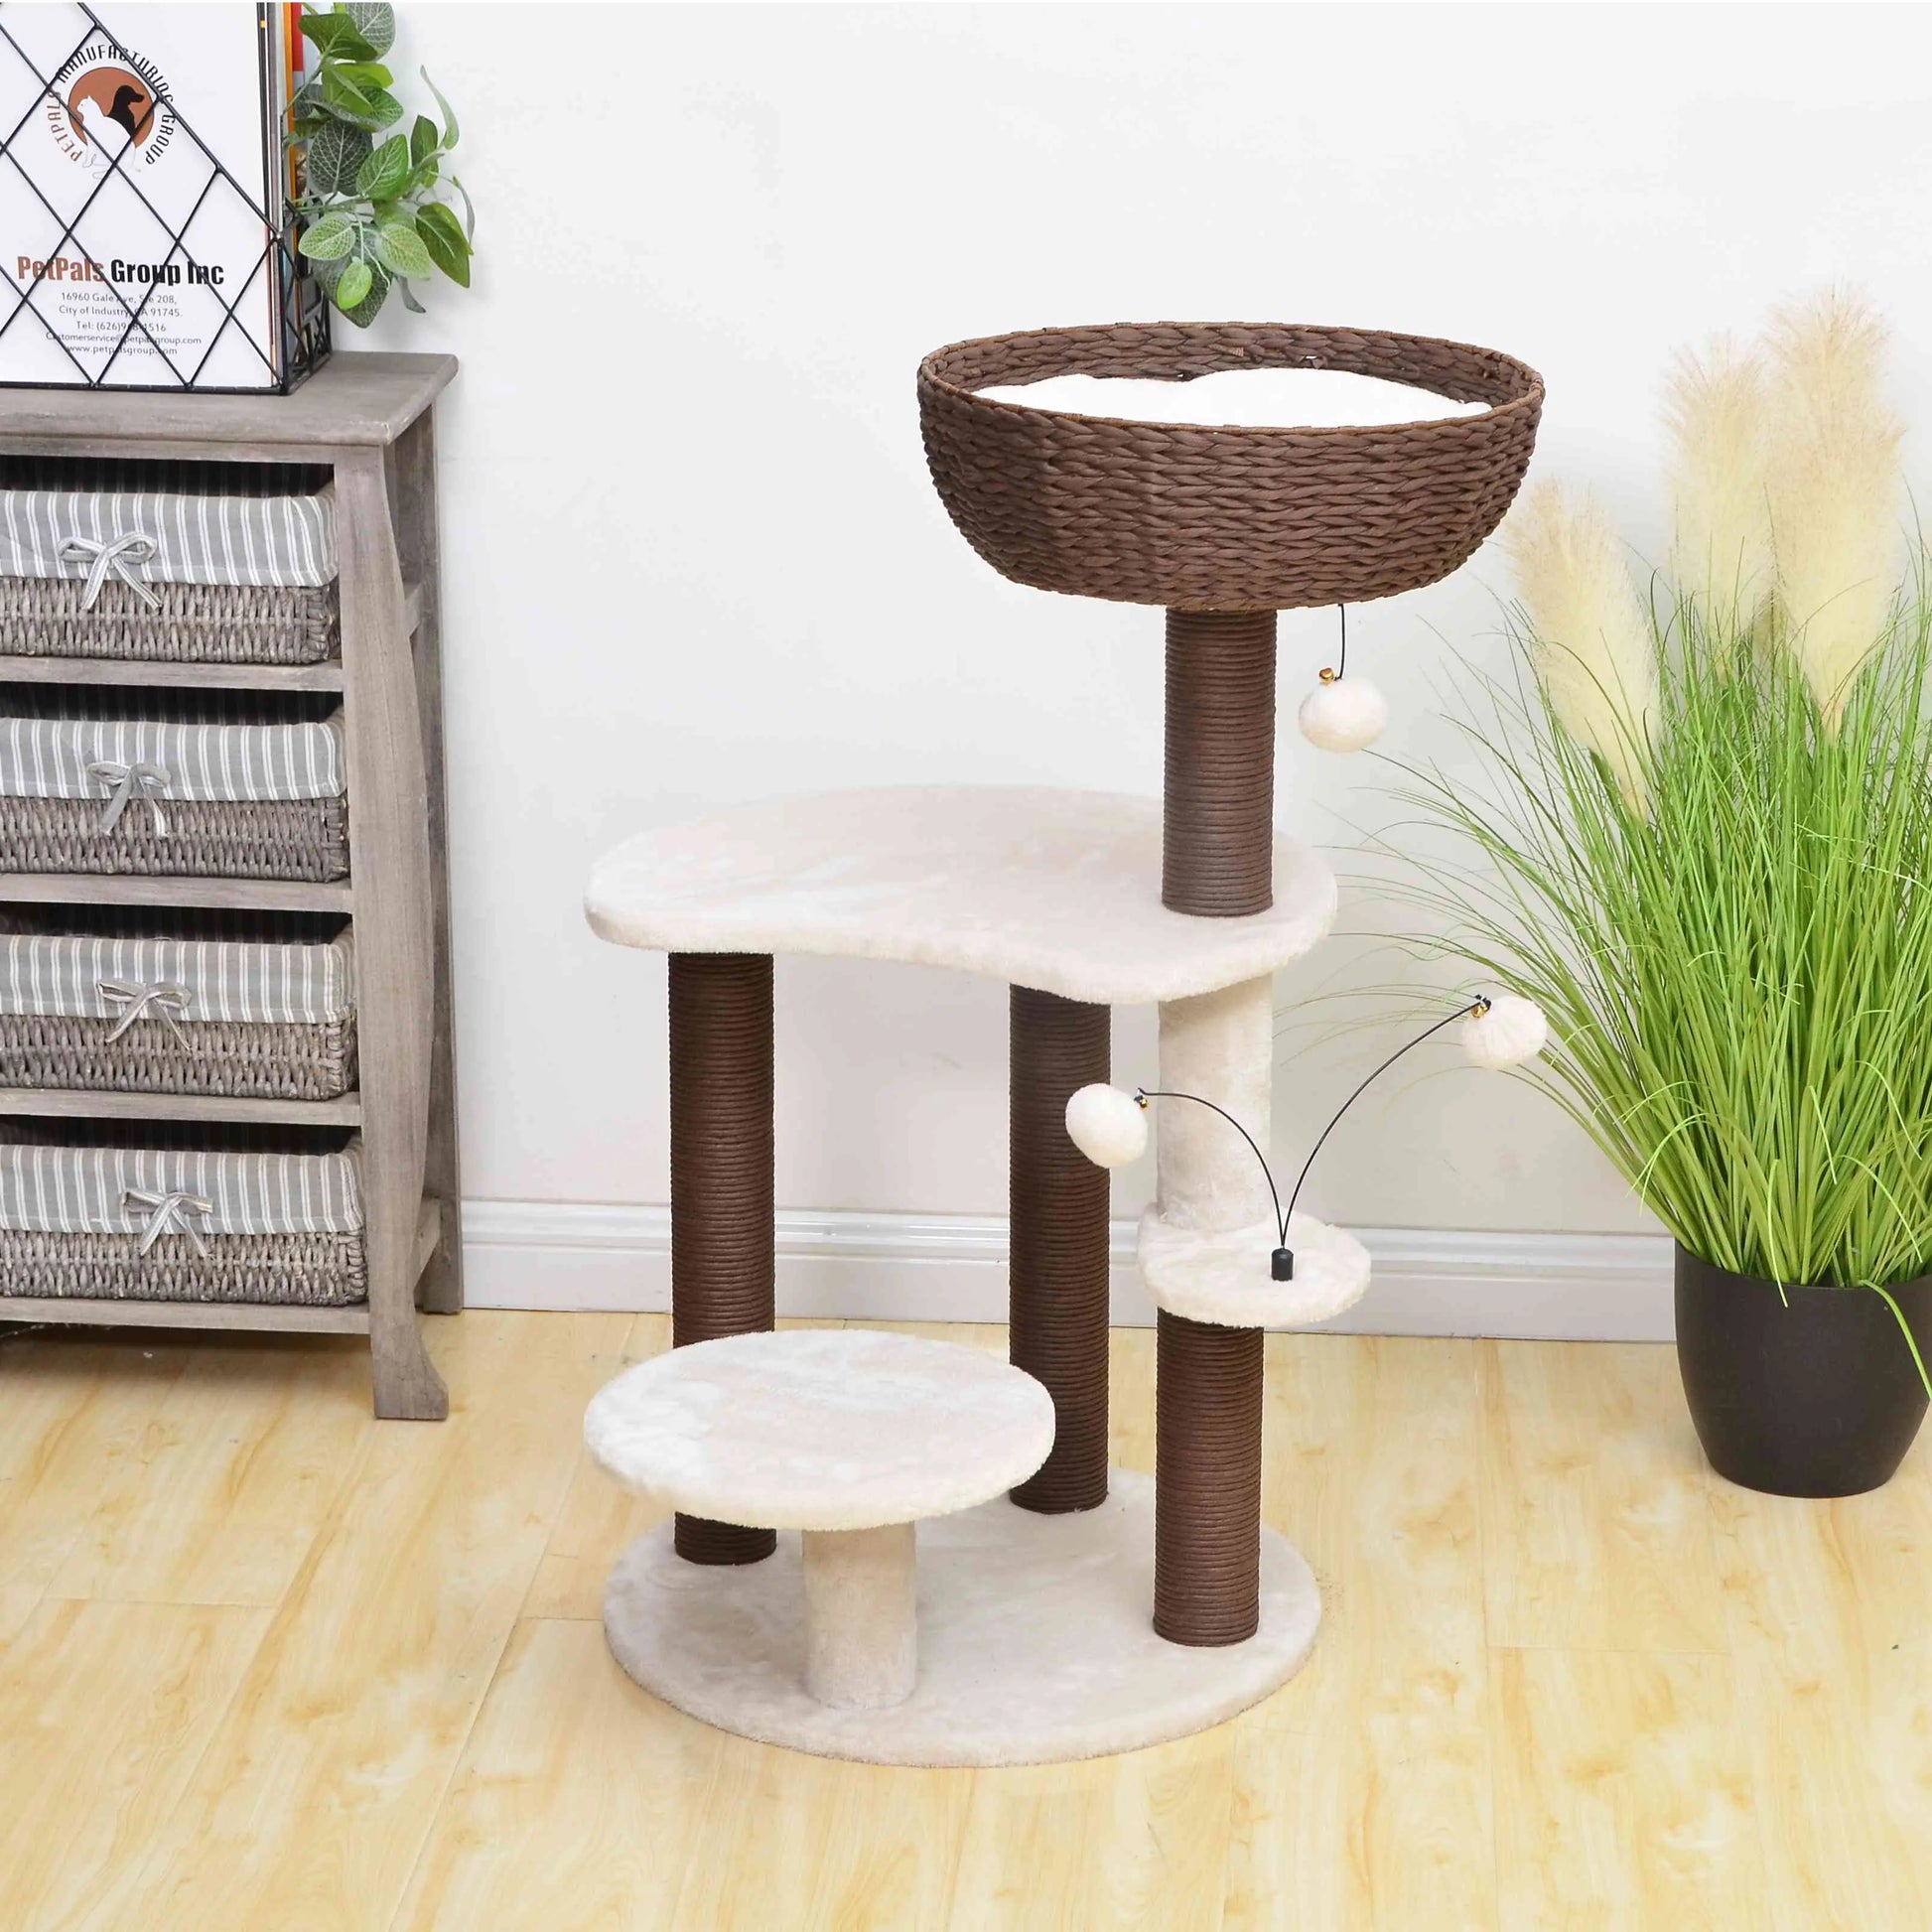 Petpals Quartz 5 Level Cat Tree with 4 Scratching Posts and Handwoven Basket PetPals Group